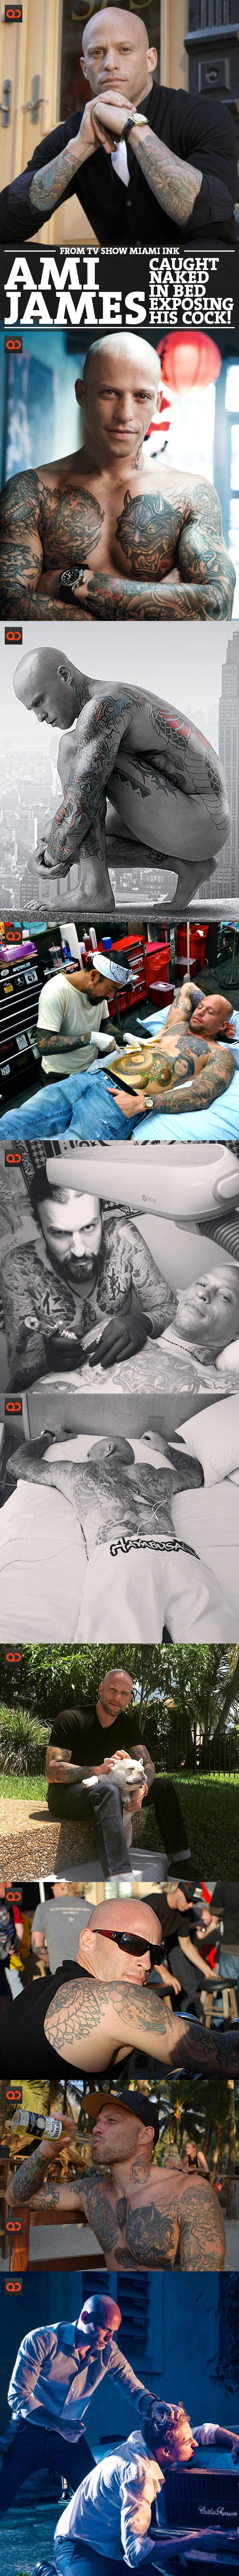 Ami James, From TV Show Miami Ink, Caught Naked In Bed Exposing His Cock!